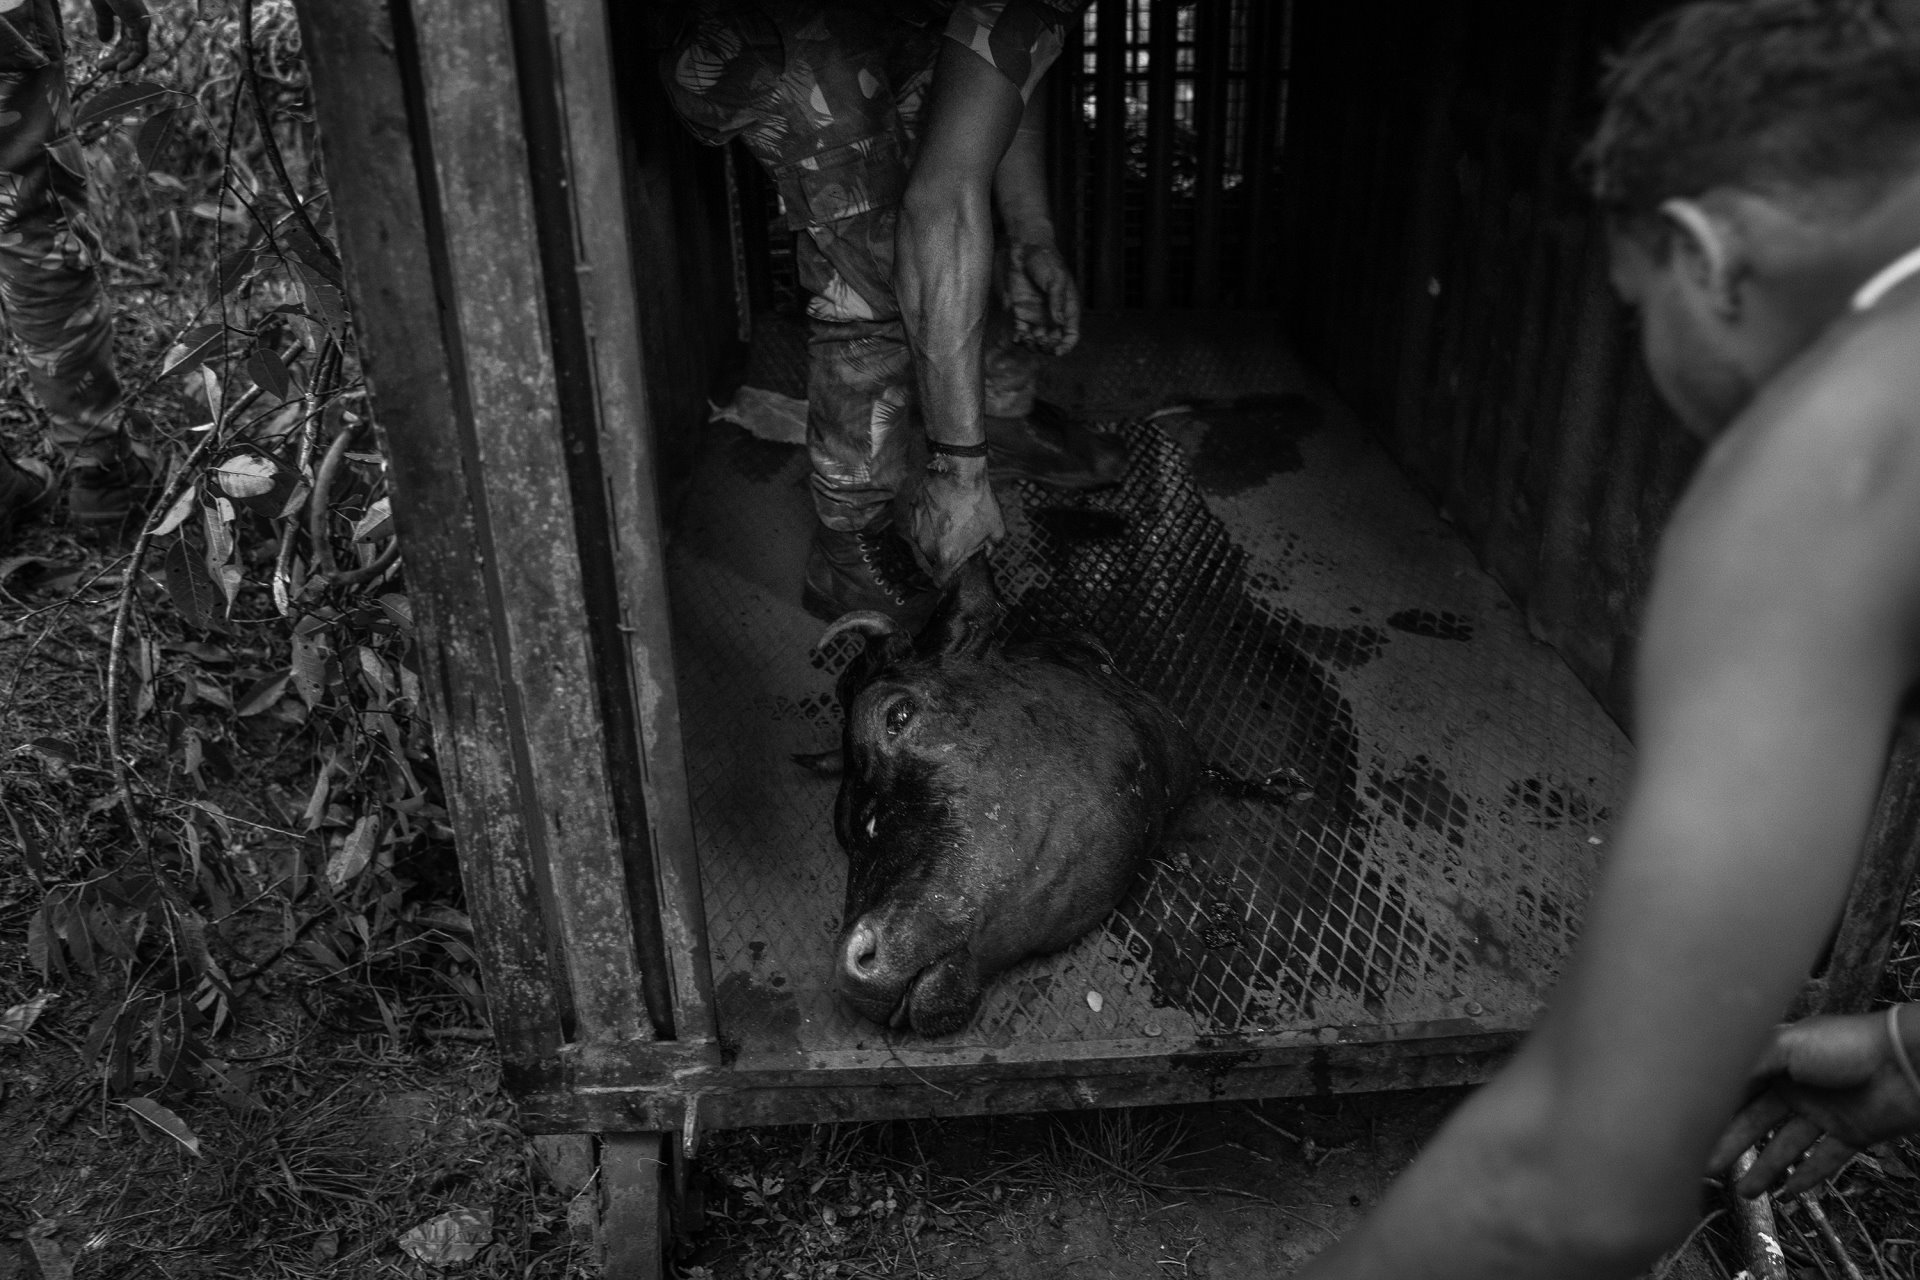 After a tiger had killed almost 40 cattle in the village of Gudalur, near the Mudumalai Tiger Reserve, in Tamil Nadu, India, forest officials drag the remains of one of the beasts into a trap to act as bait to lure the tiger.